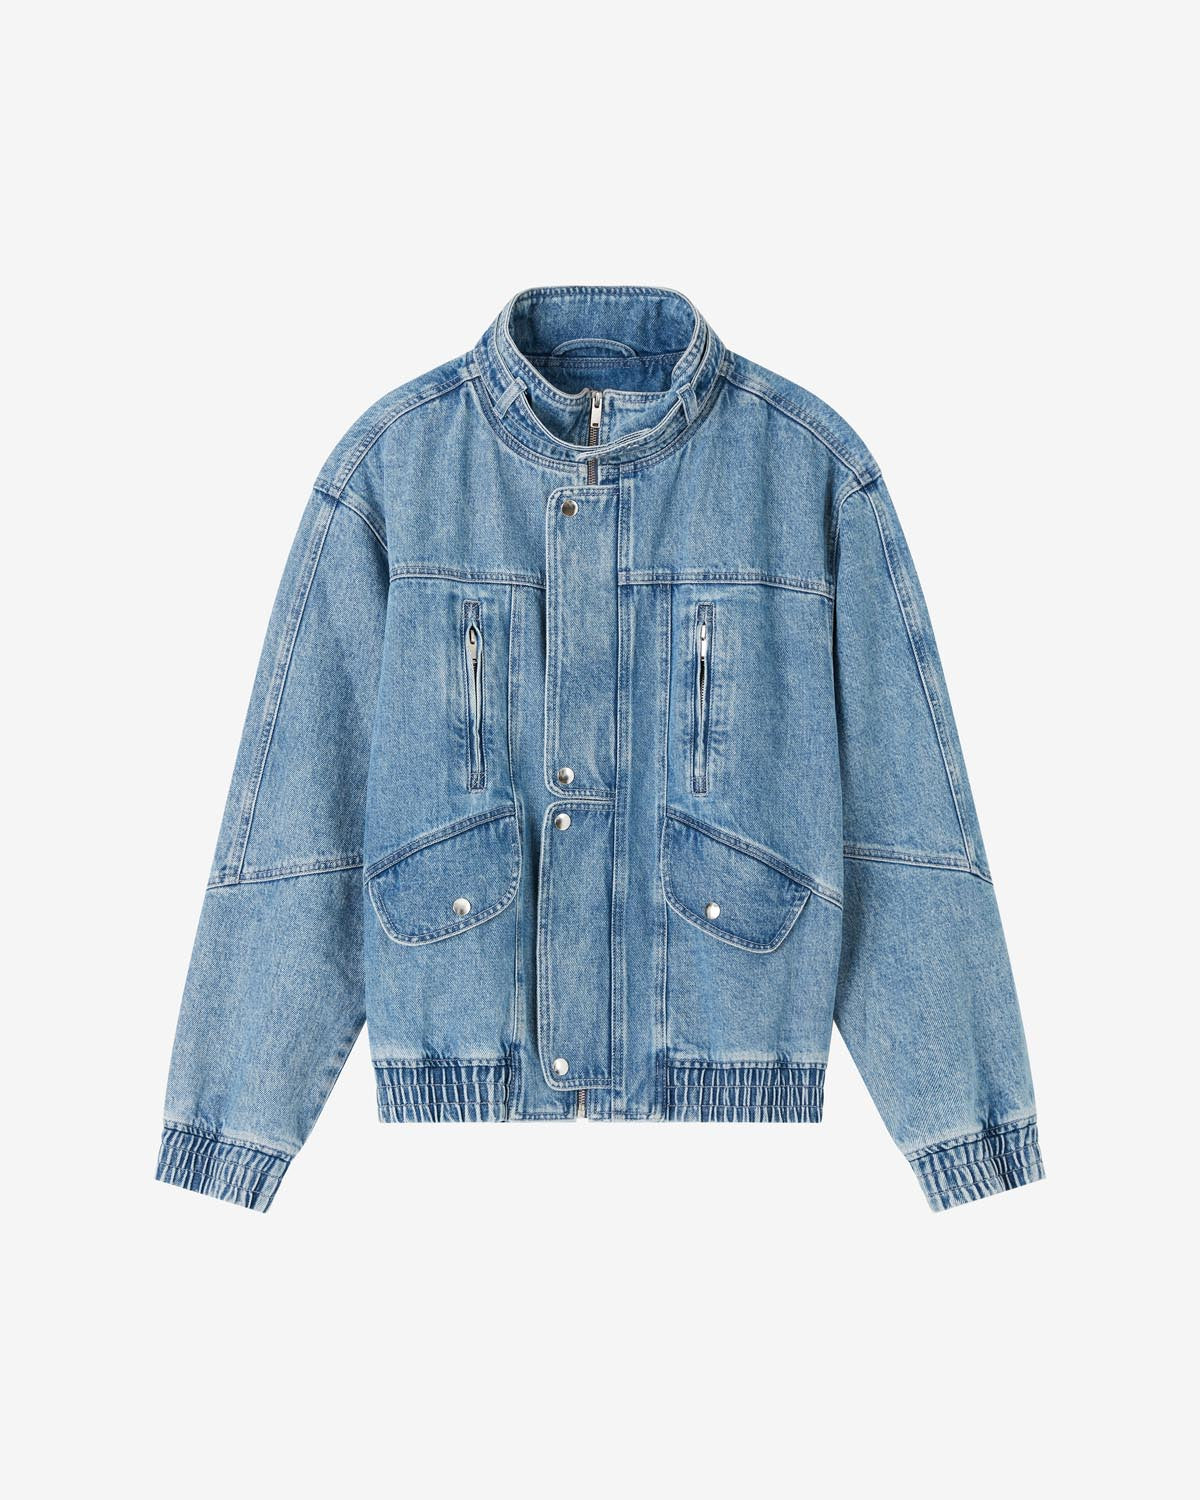 Coats and Jackets Man | ISABEL MARANT Official Online Store